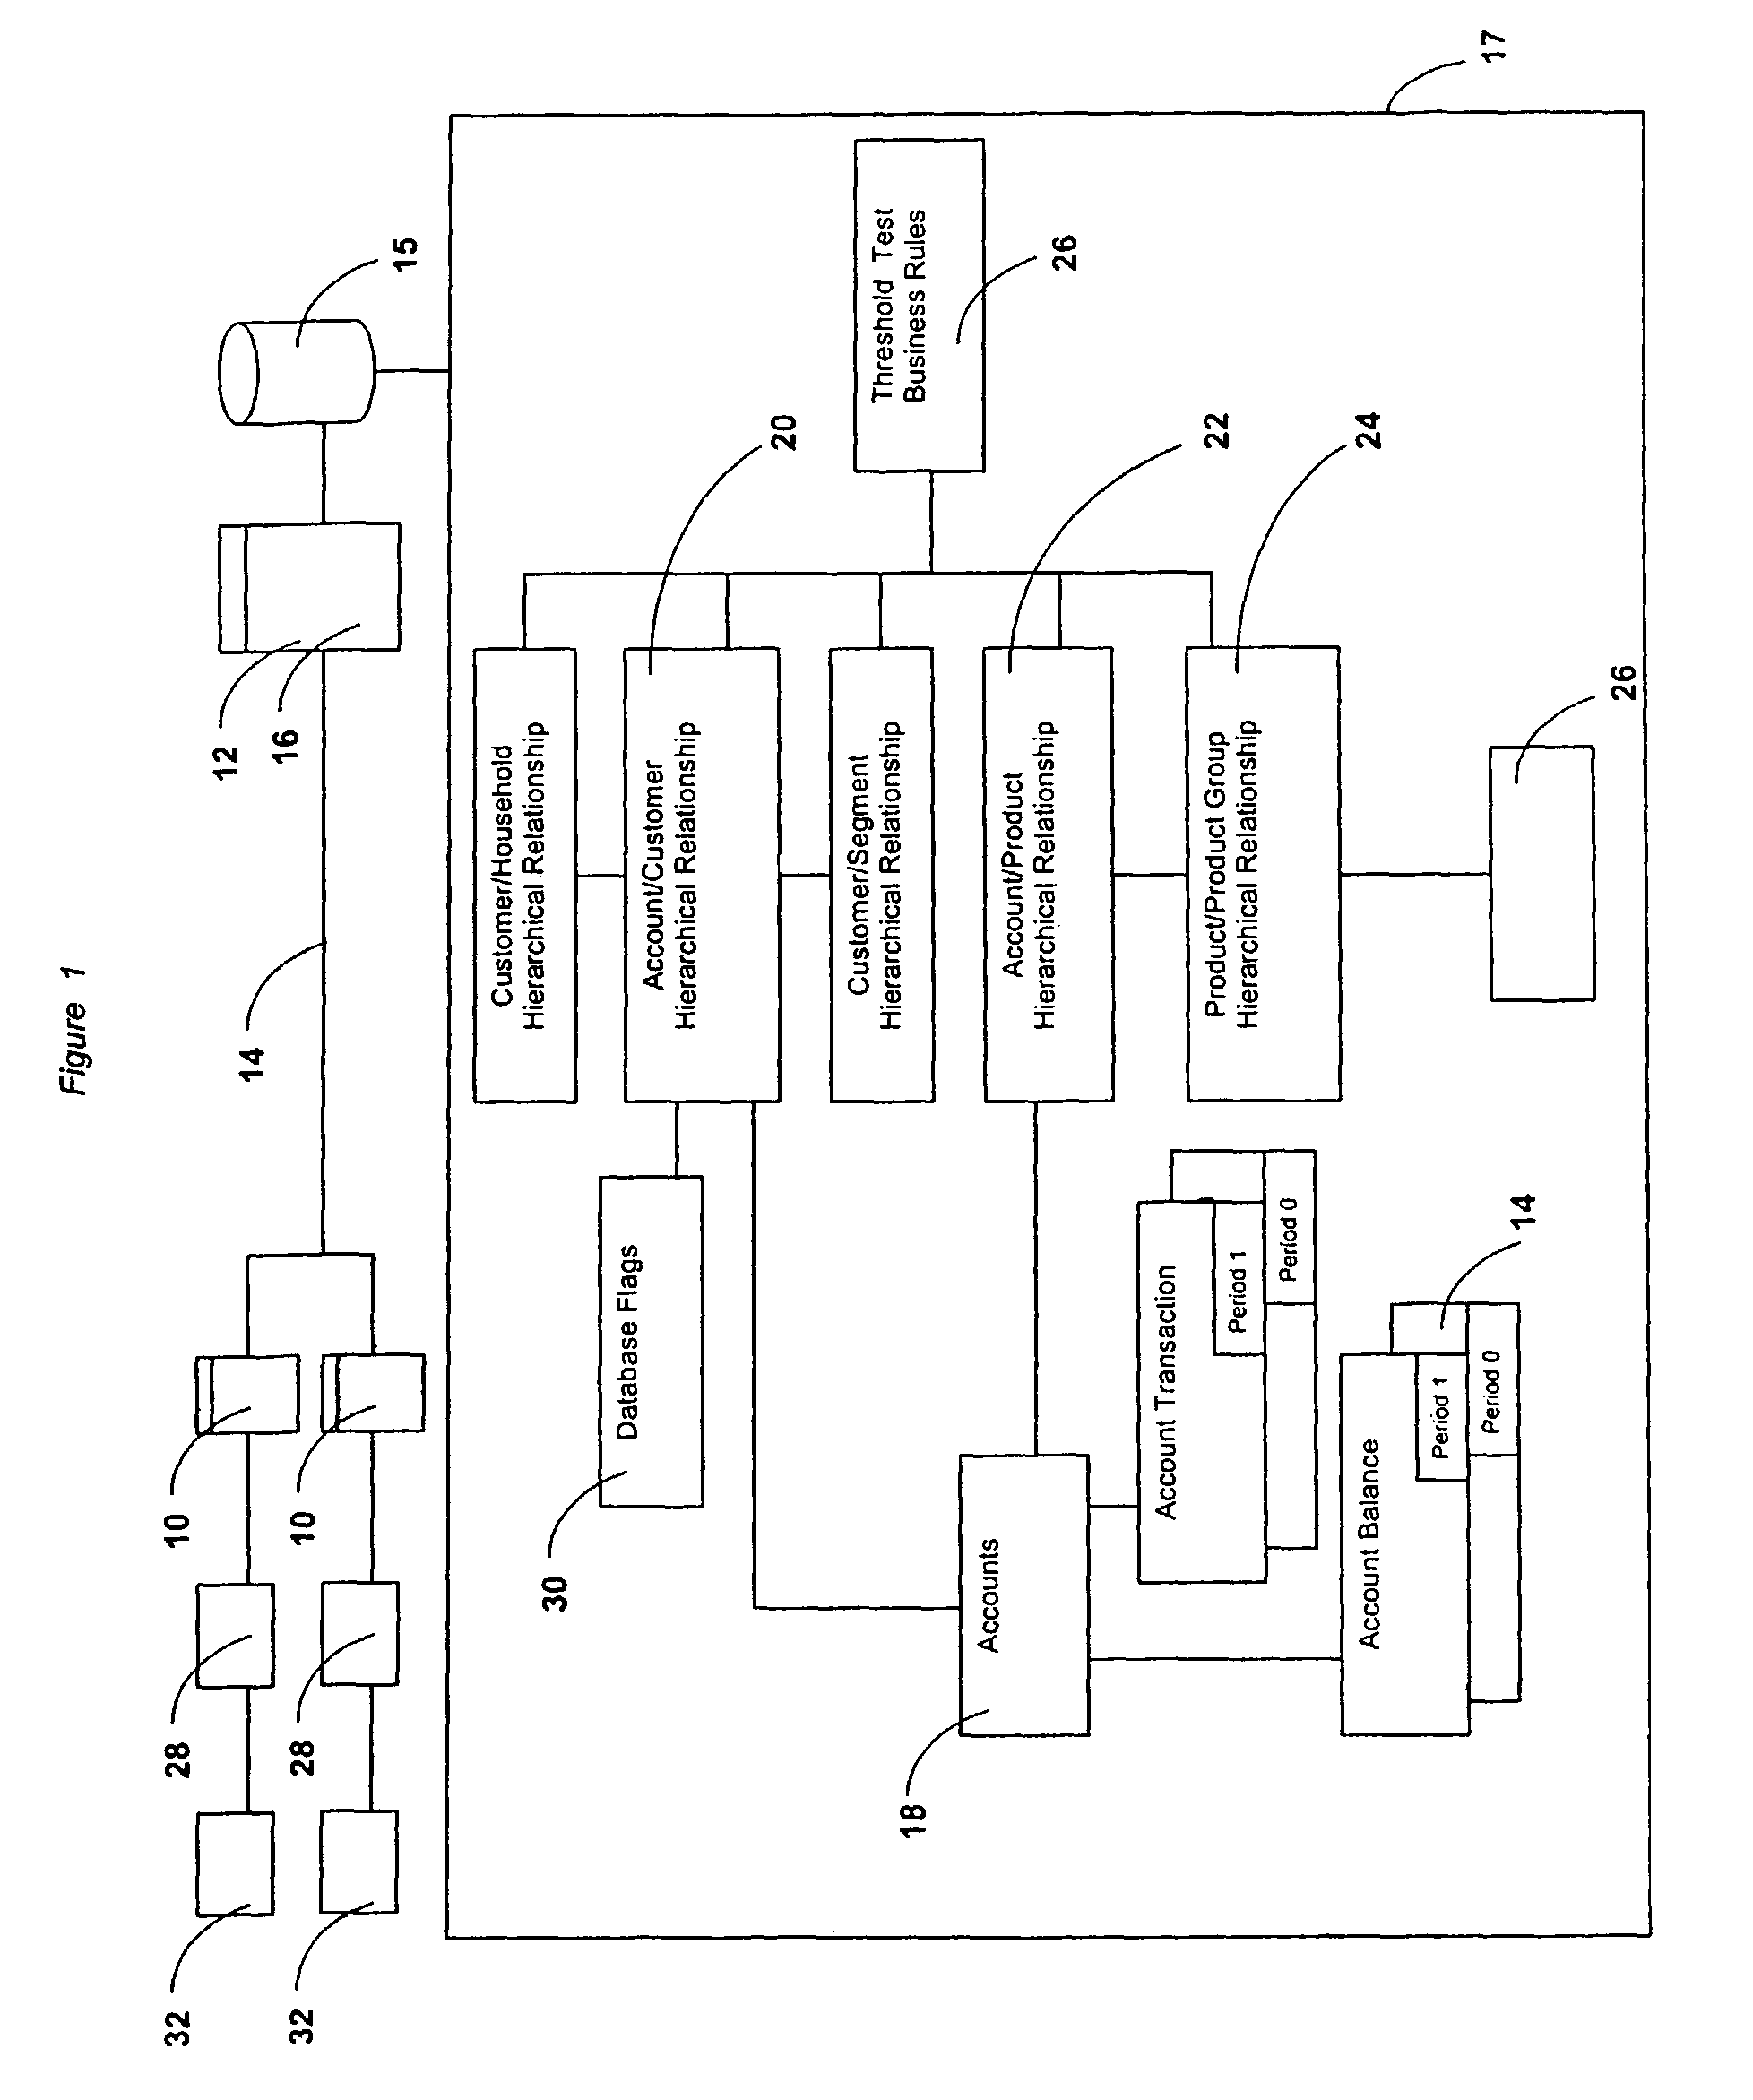 Method, system and apparatus for measuring and analyzing customer business volume